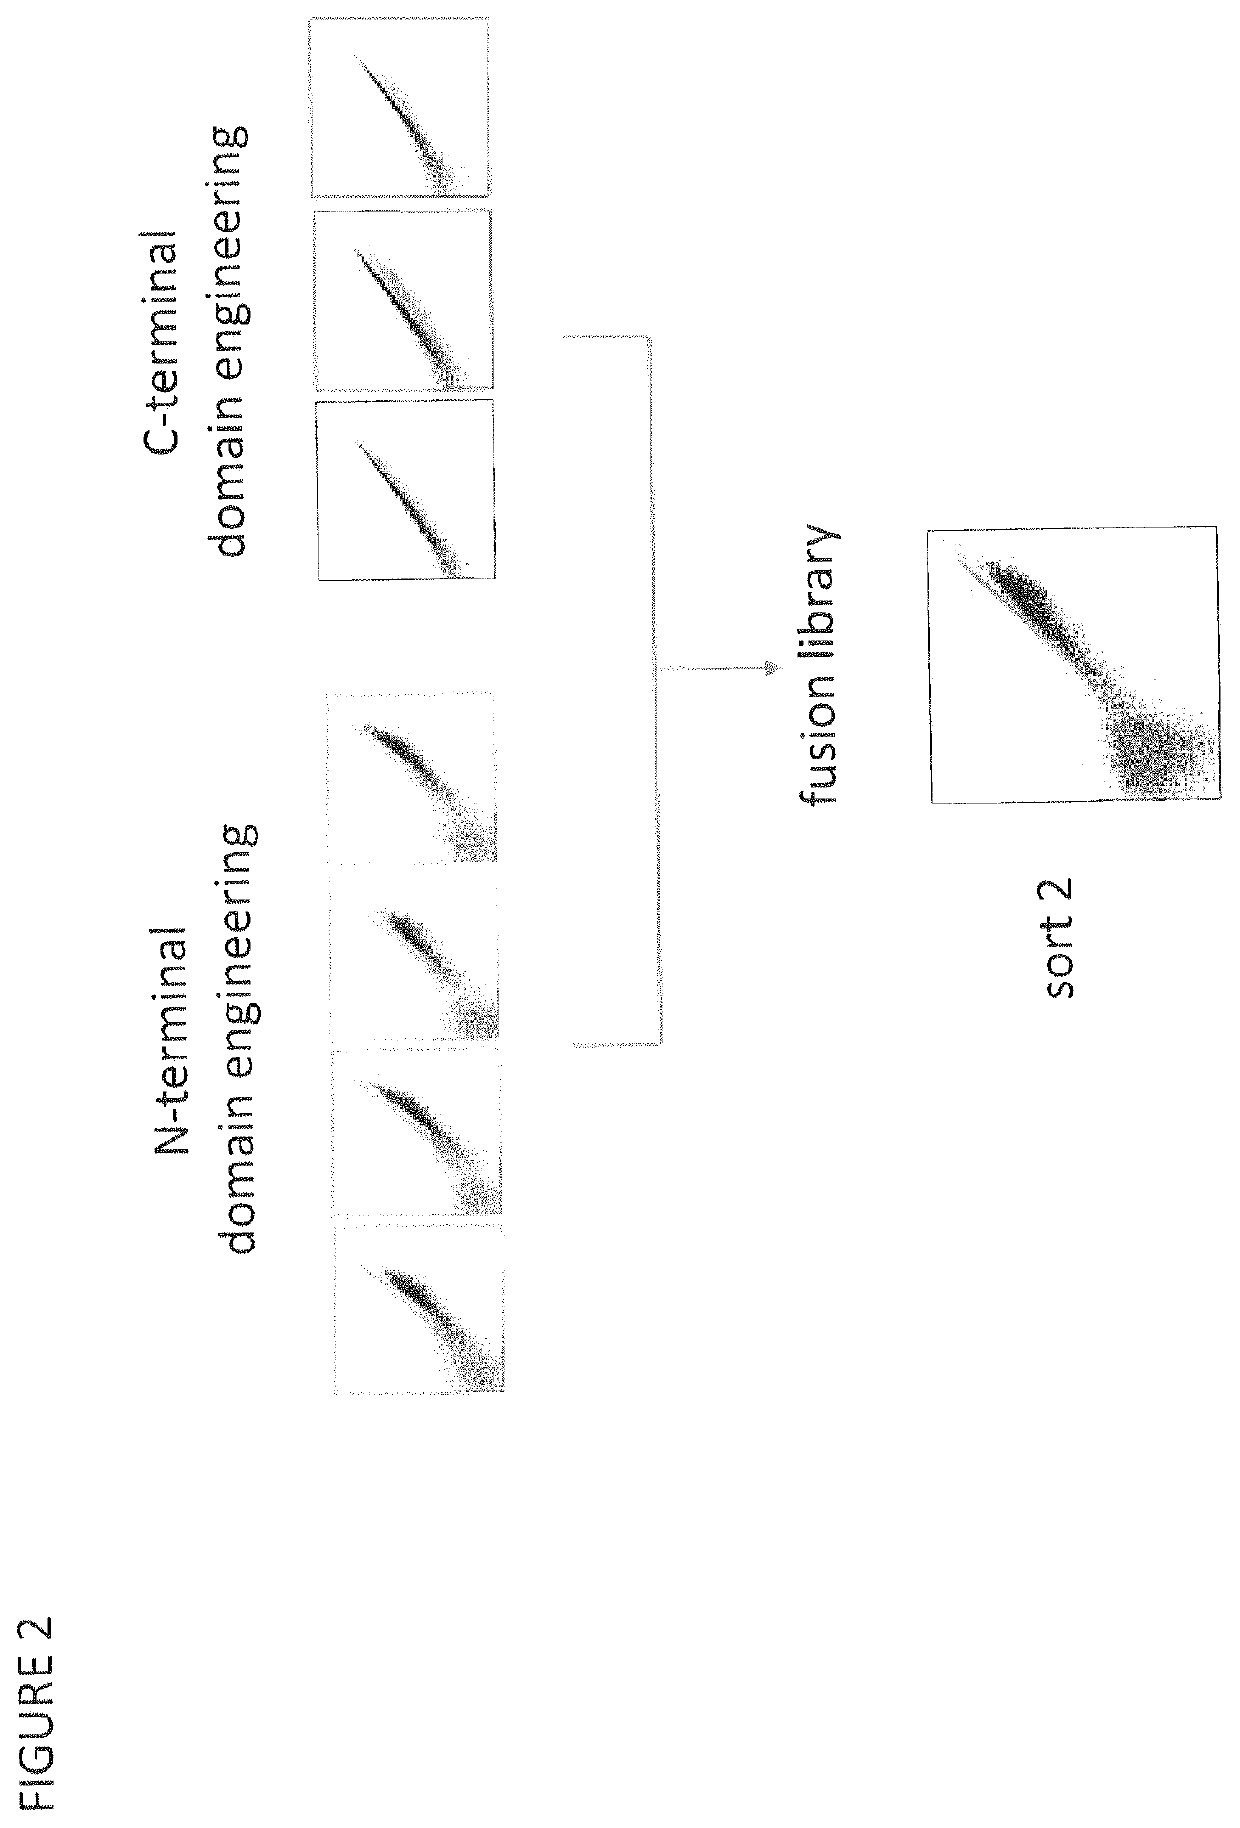 CBLB endonuclease variants, compositions, and methods of use